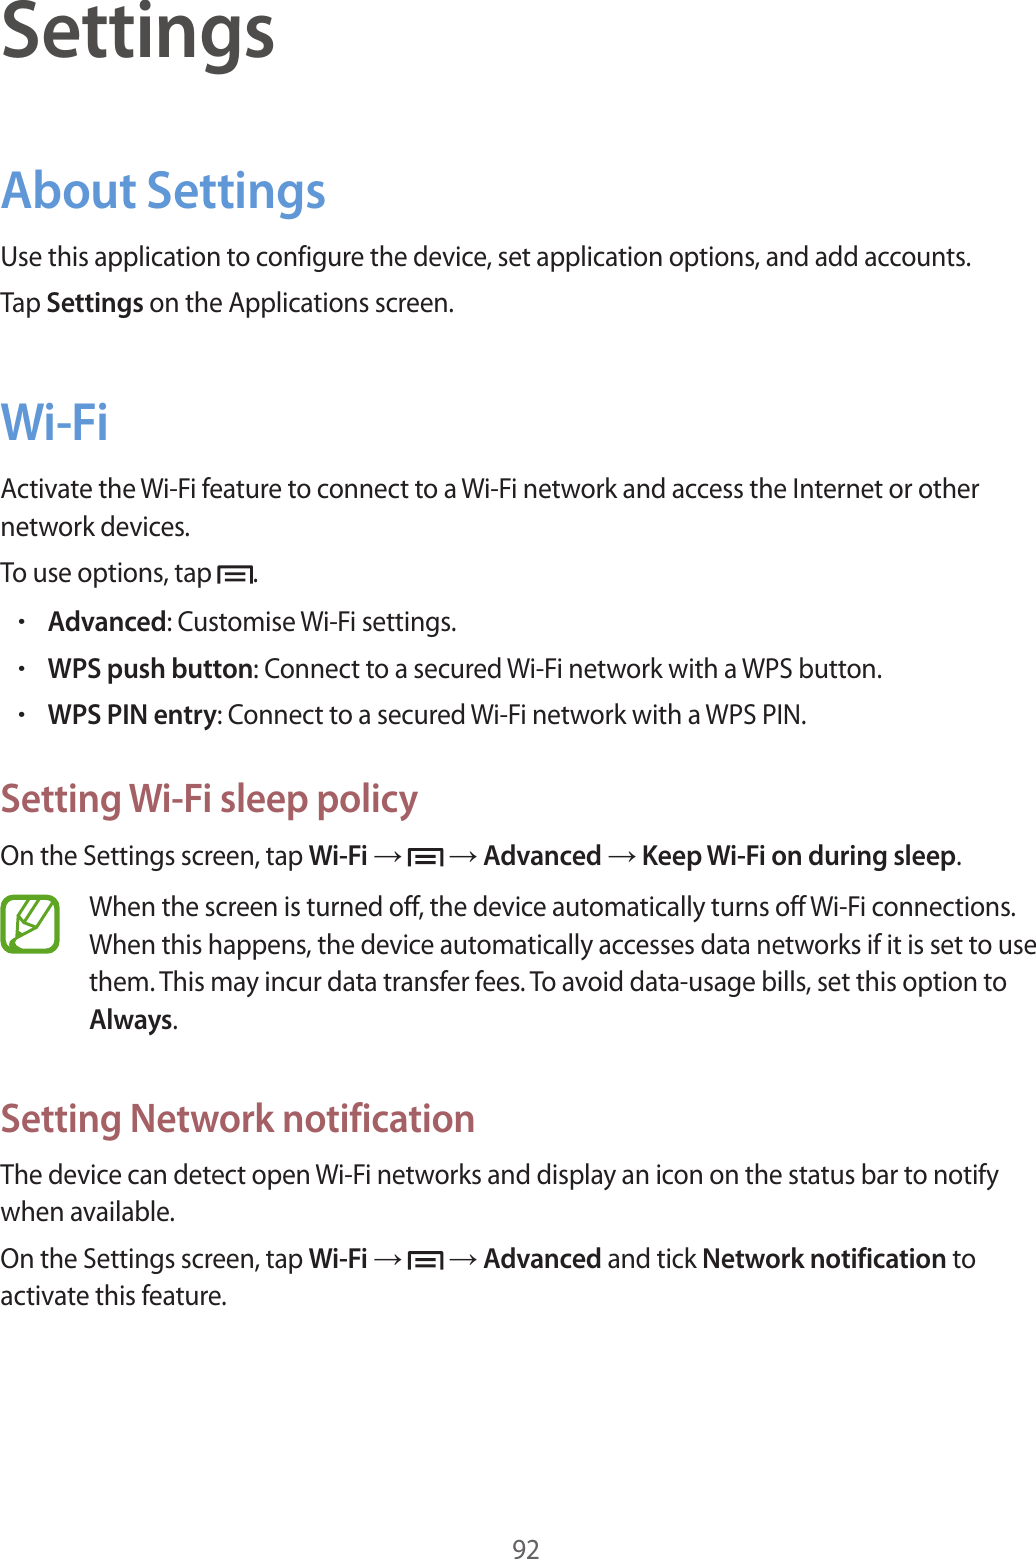 92SettingsAbout SettingsUse this application to configure the device, set application options, and add accounts.Tap Settings on the Applications screen.Wi-FiActivate the Wi-Fi feature to connect to a Wi-Fi network and access the Internet or other network devices.To use options, tap  .•Advanced: Customise Wi-Fi settings.•WPS push button: Connect to a secured Wi-Fi network with a WPS button.•WPS PIN entry: Connect to a secured Wi-Fi network with a WPS PIN.Setting Wi-Fi sleep policyOn the Settings screen, tap Wi-Fi →   → Advanced → Keep Wi-Fi on during sleep.When the screen is turned off, the device automatically turns off Wi-Fi connections. When this happens, the device automatically accesses data networks if it is set to use them. This may incur data transfer fees. To avoid data-usage bills, set this option to Always.Setting Network notificationThe device can detect open Wi-Fi networks and display an icon on the status bar to notify when available.On the Settings screen, tap Wi-Fi →   → Advanced and tick Network notification to activate this feature.